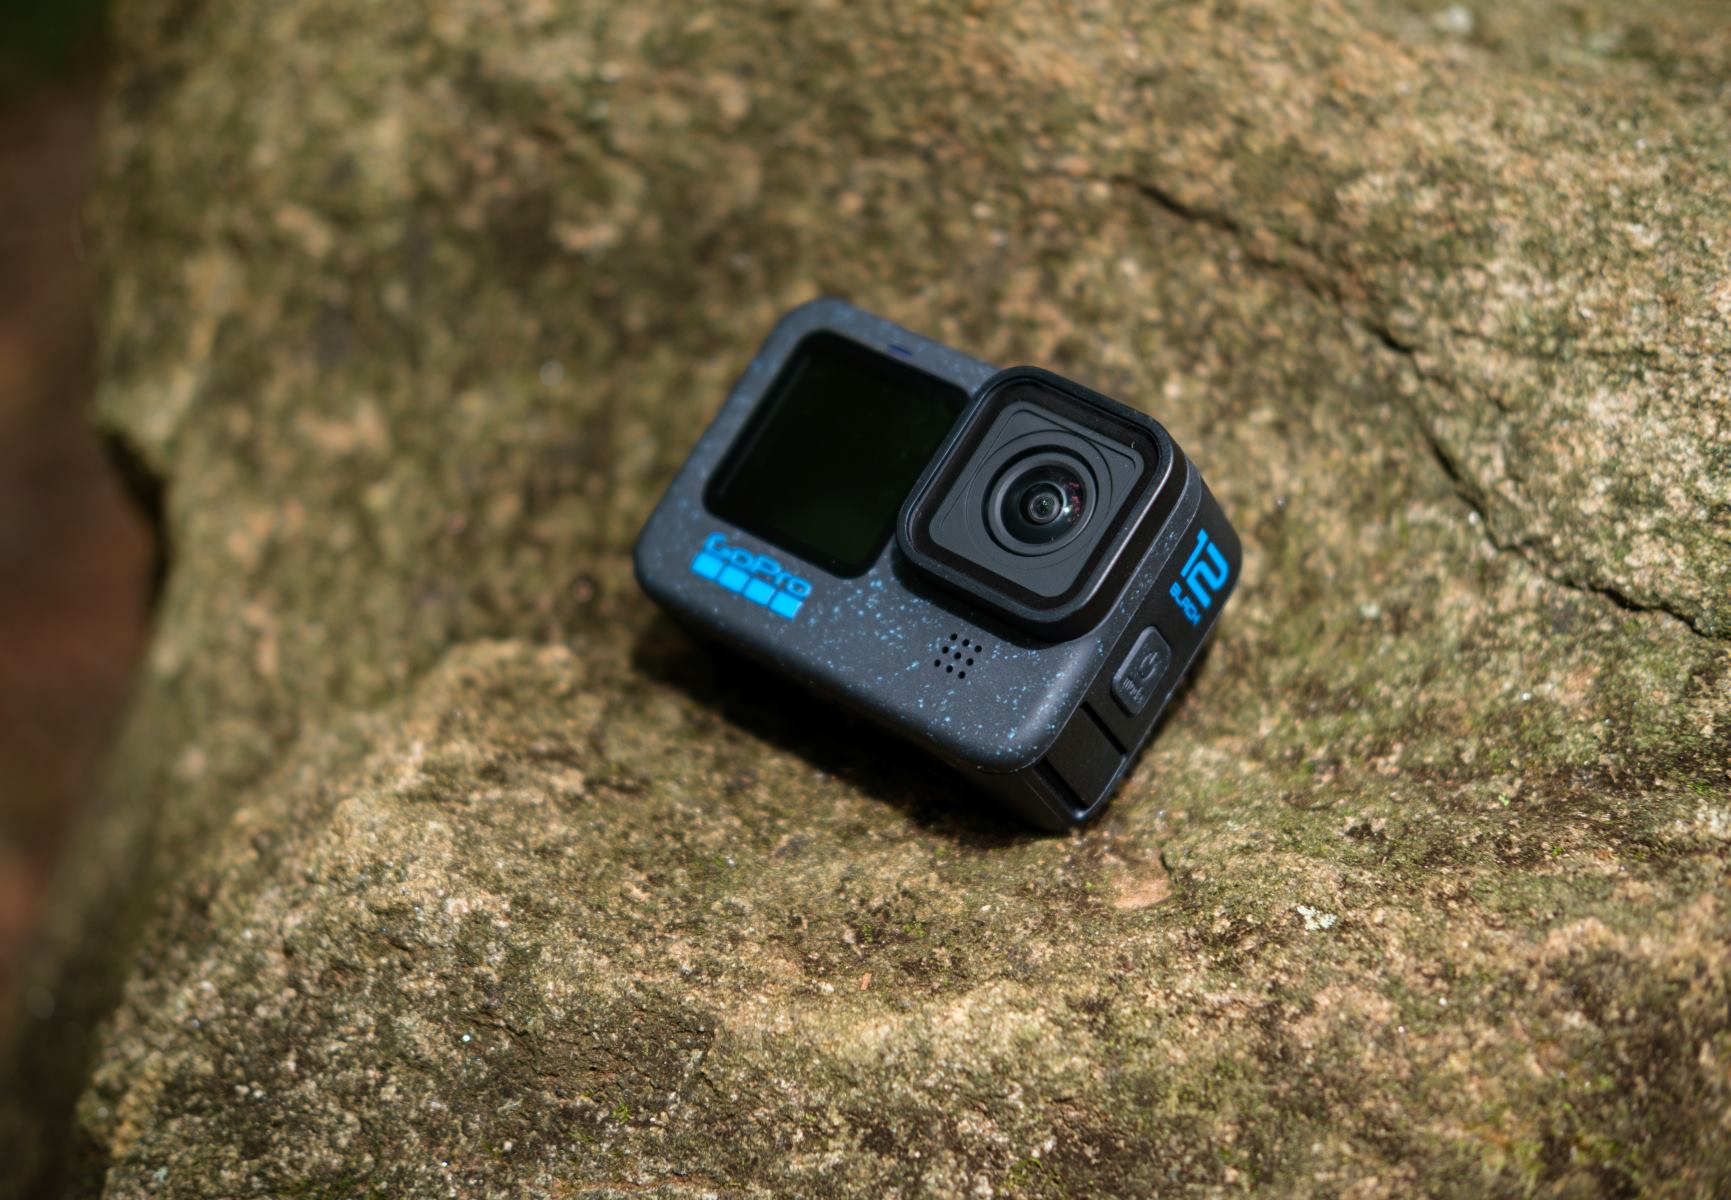 Which Computer Plays 4K Videos From An Action Camera Smoothly